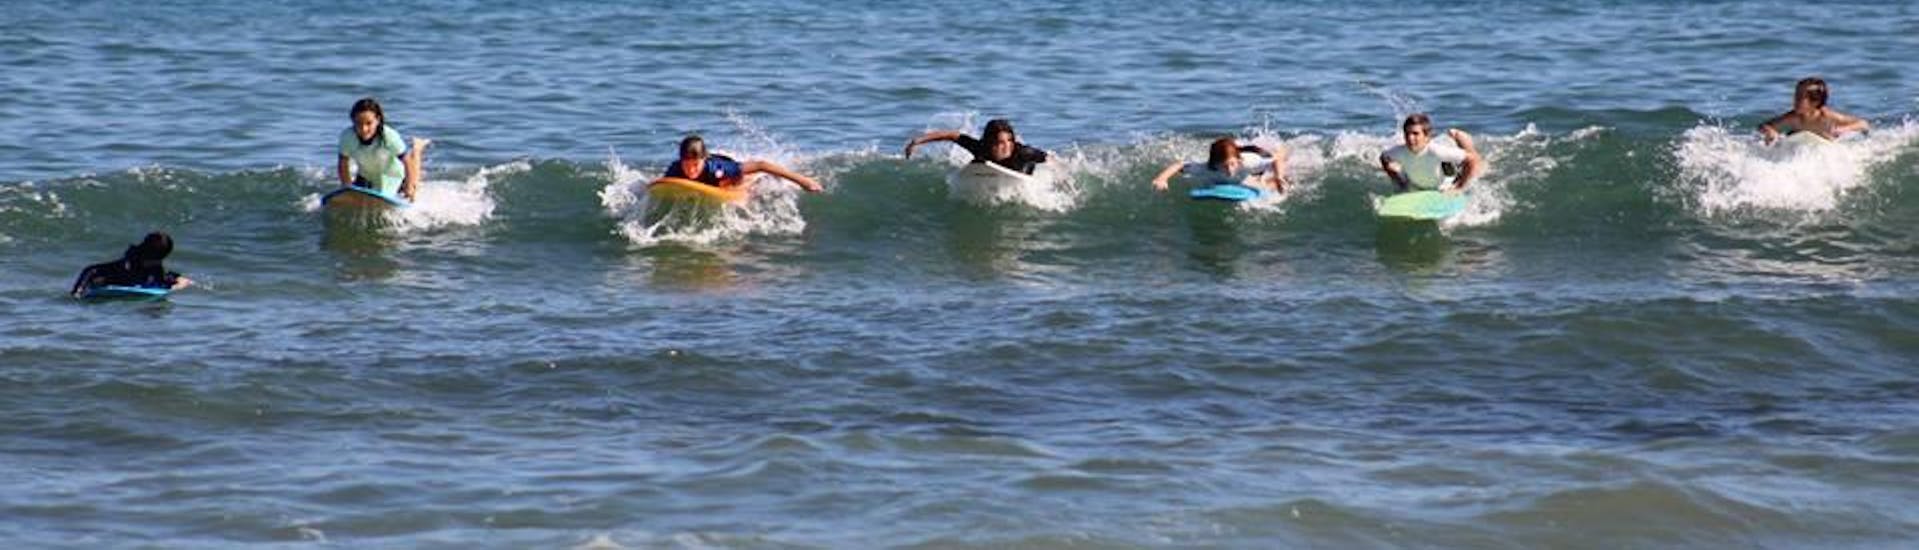 Surfing Lessons for Kids & Adults - All Levels.